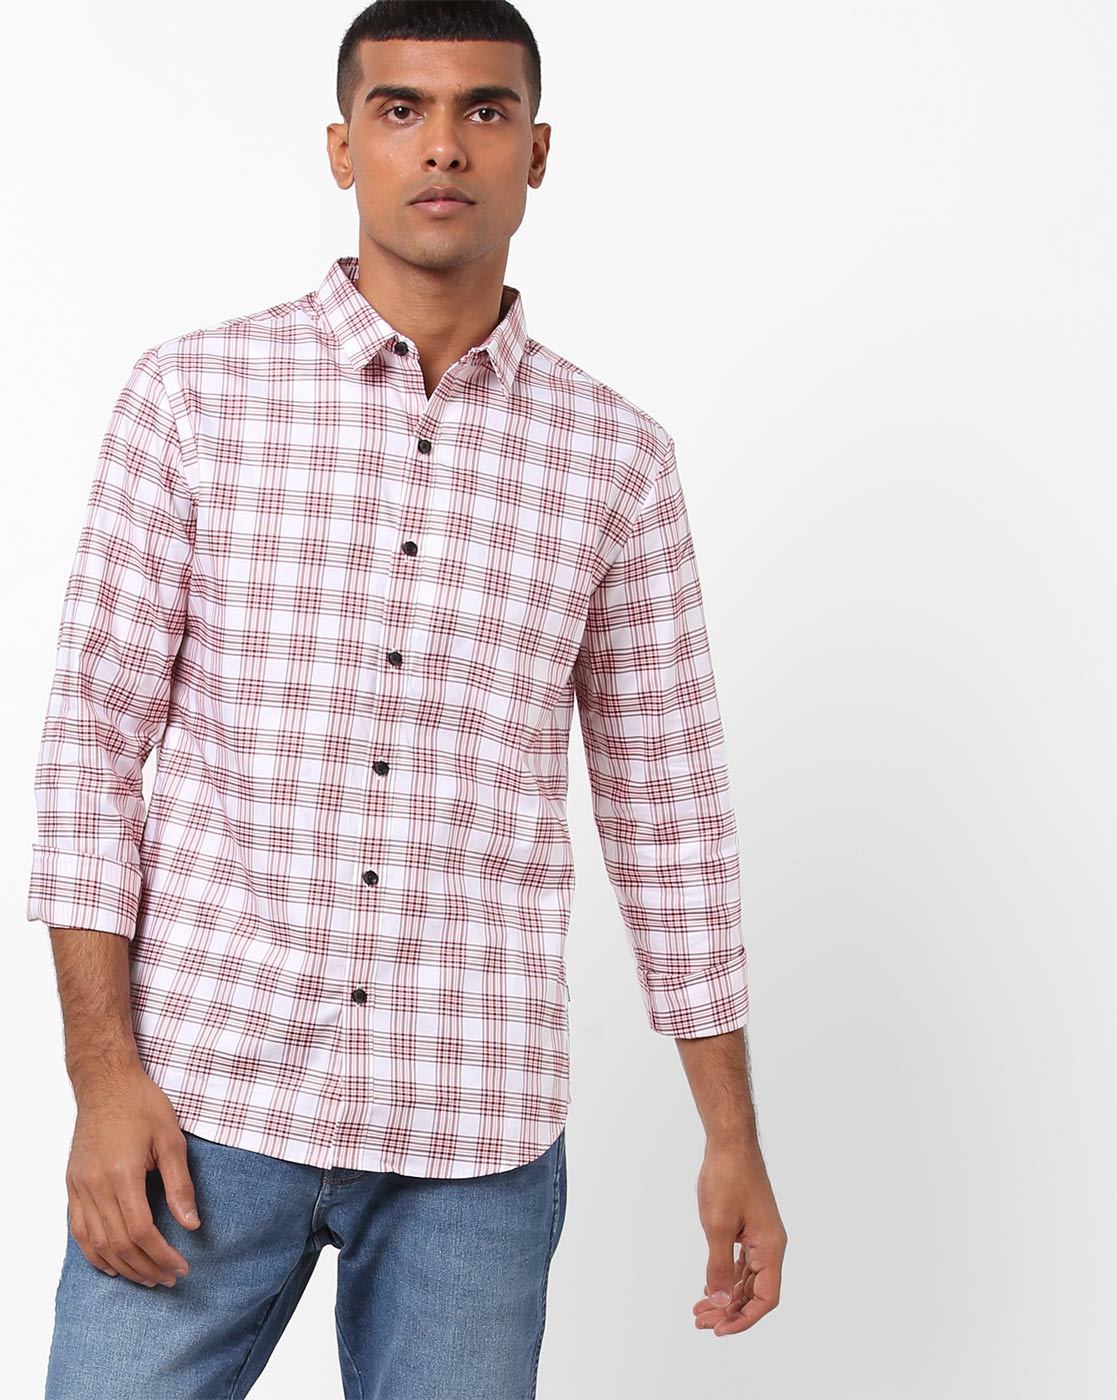 Buy White Shirts for Men by LEVIS 